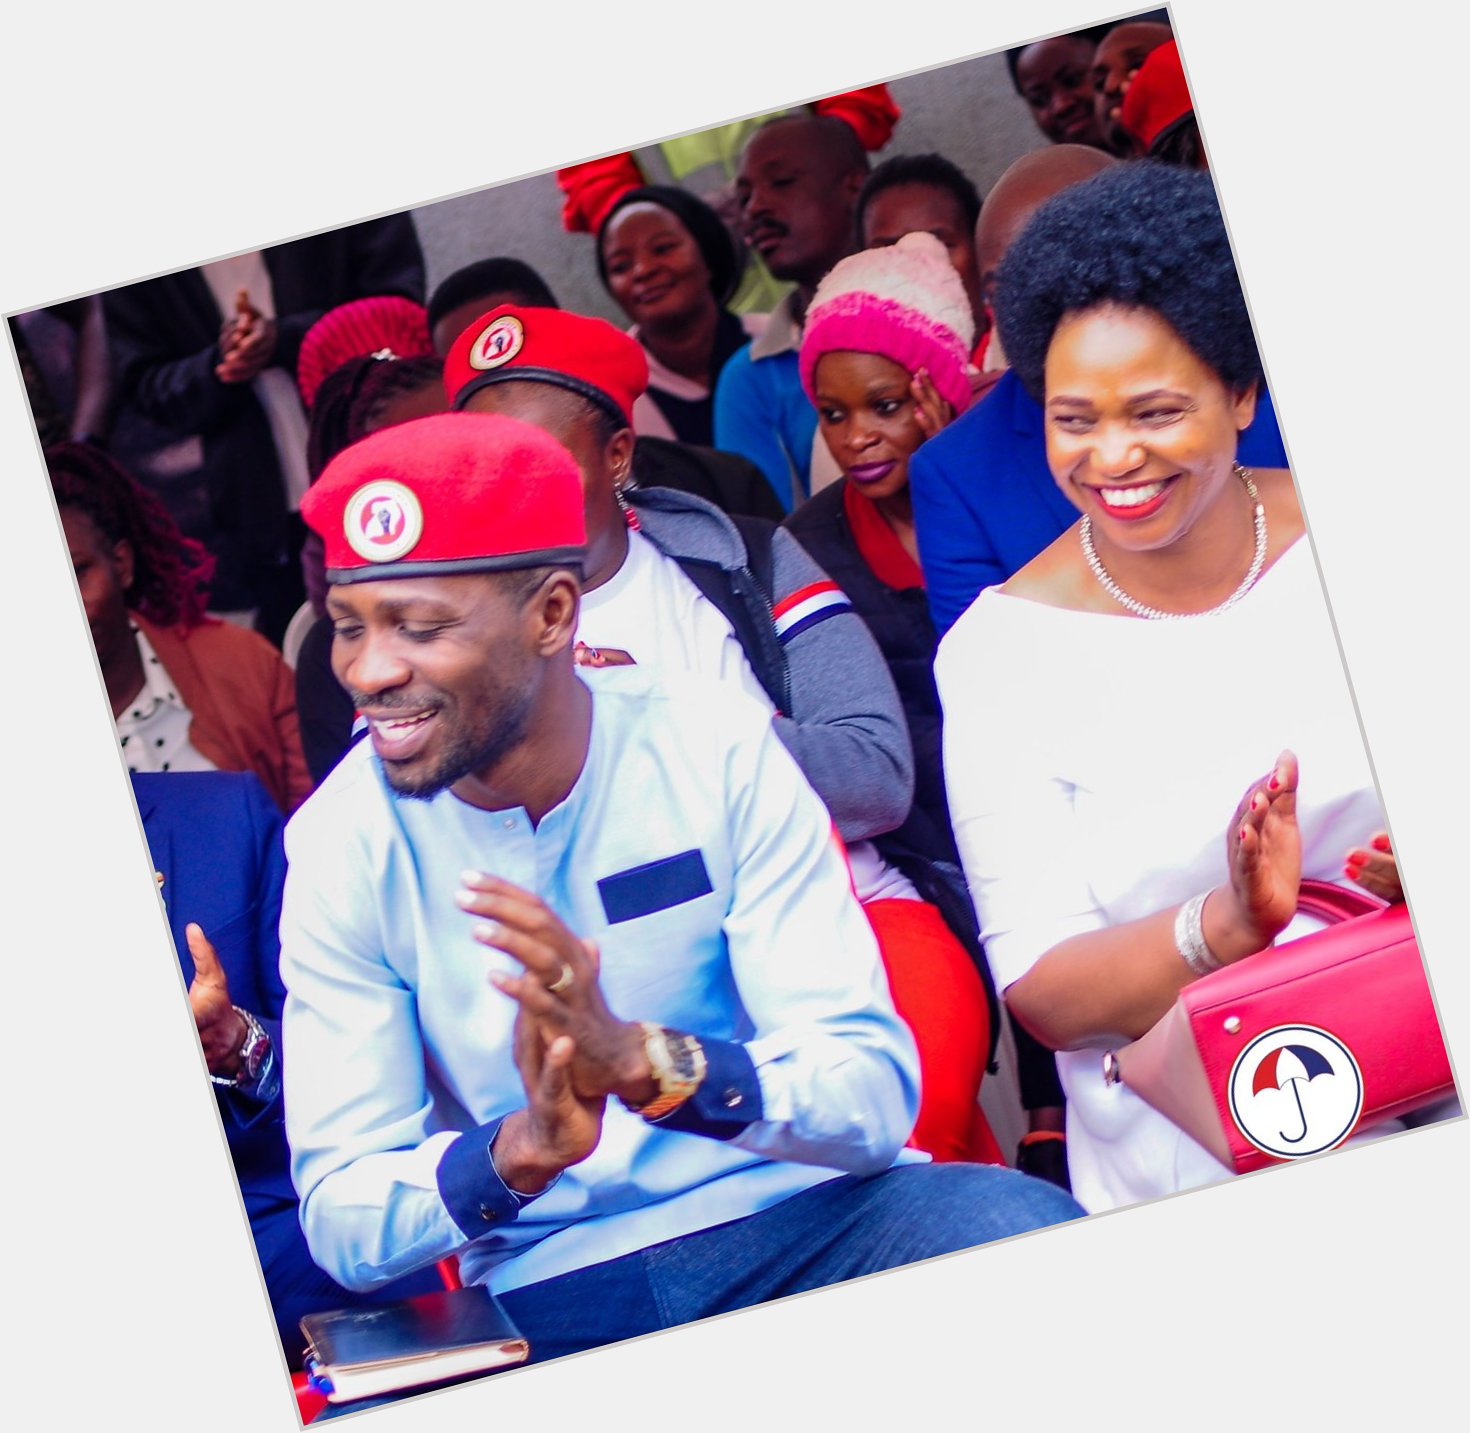 Even if am late, happy birthday to you our president Bobi wine more years and blessings  